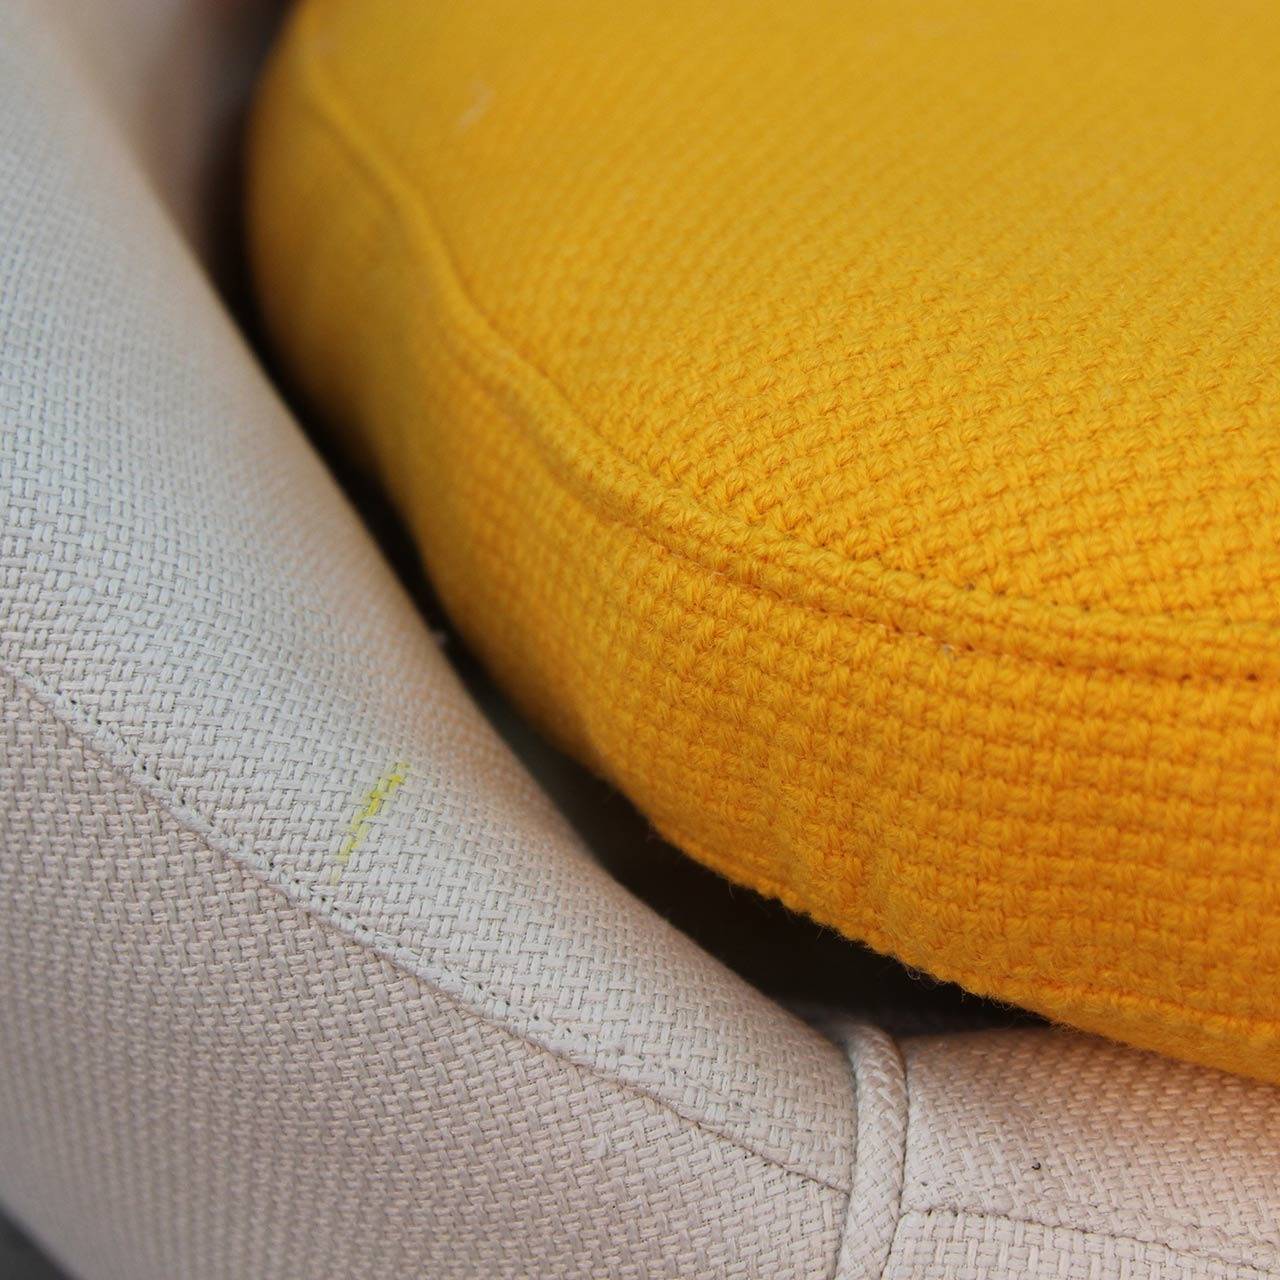 This chair is a lot of fun. I have two sets of cushions for it egg yolk yellow and an off white shell set which matches the outside upholstered surface. I did a survey and the consensus was the egg yolk yellow was the choice of the majority. Its a